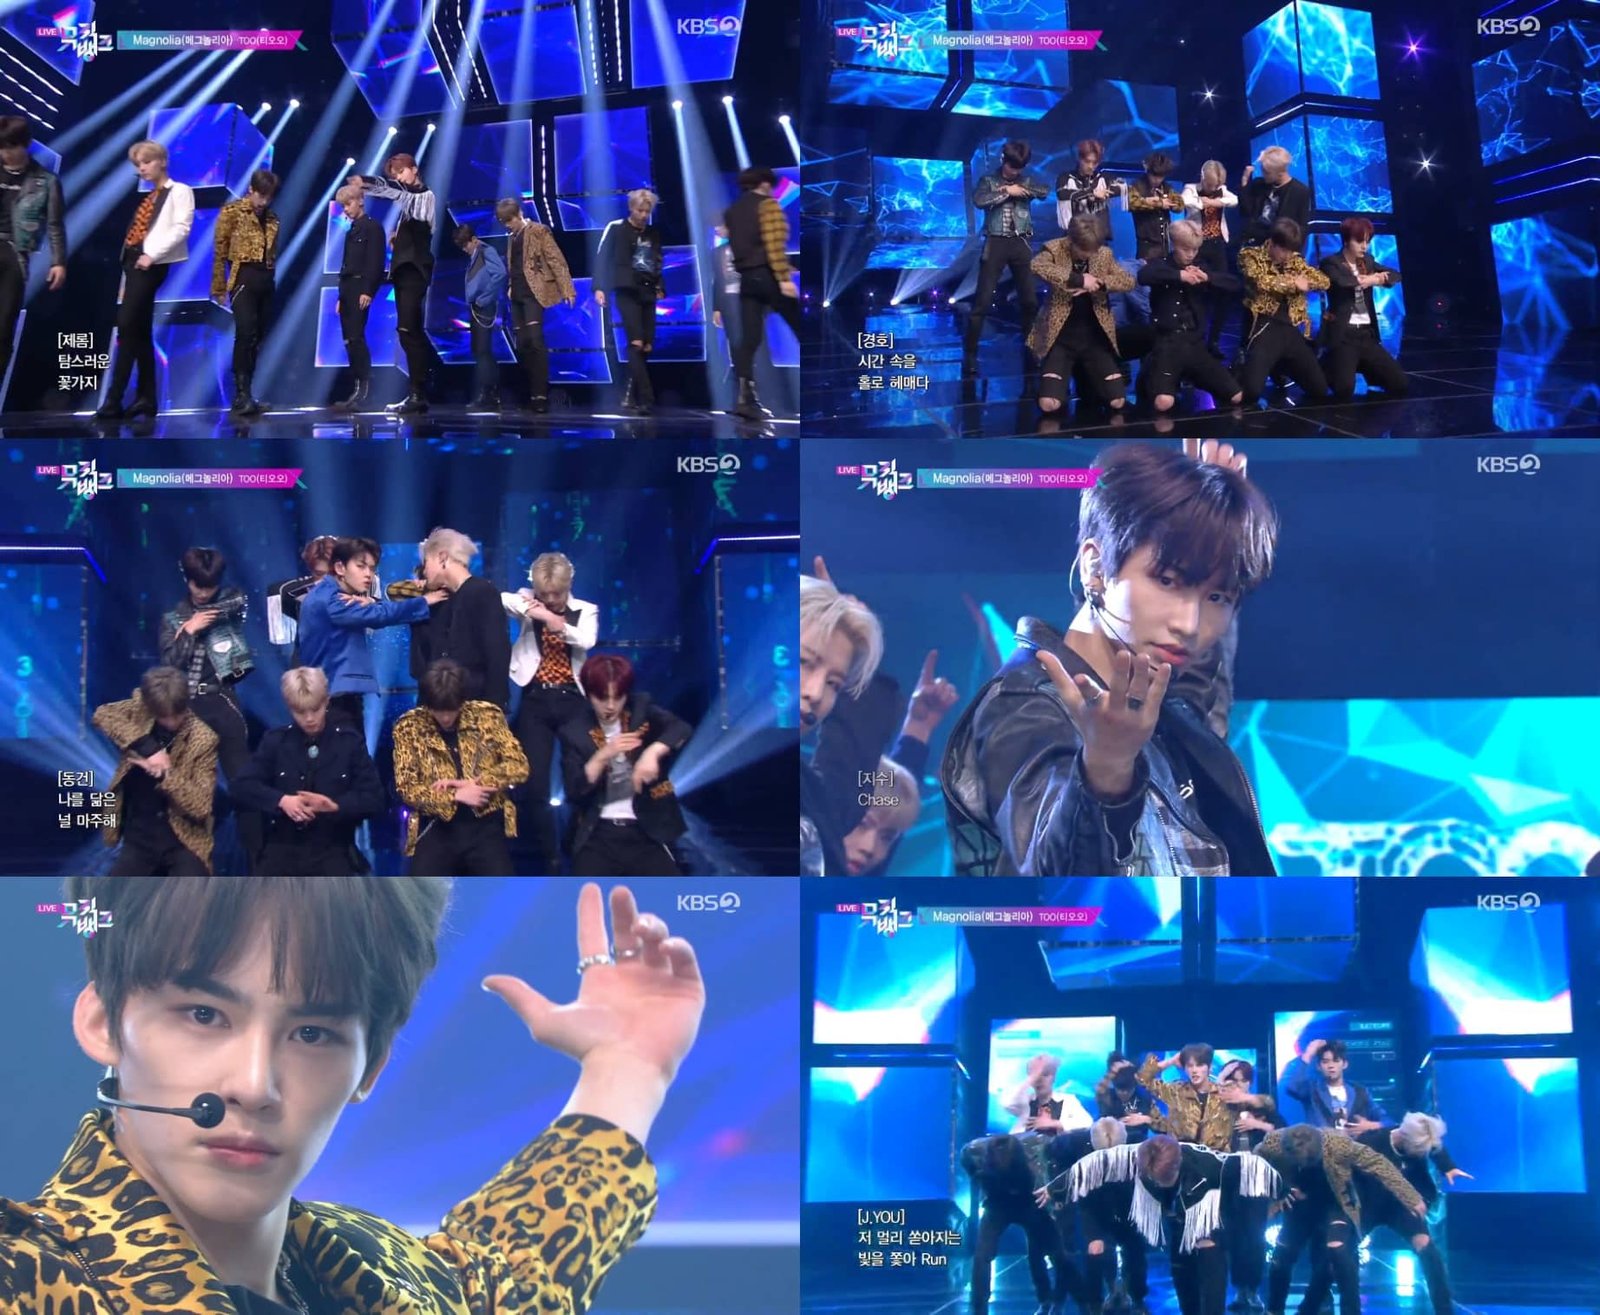 TOO shows fantastic performance unlike a rookie and shakes hearts of many on 'Music Bank'